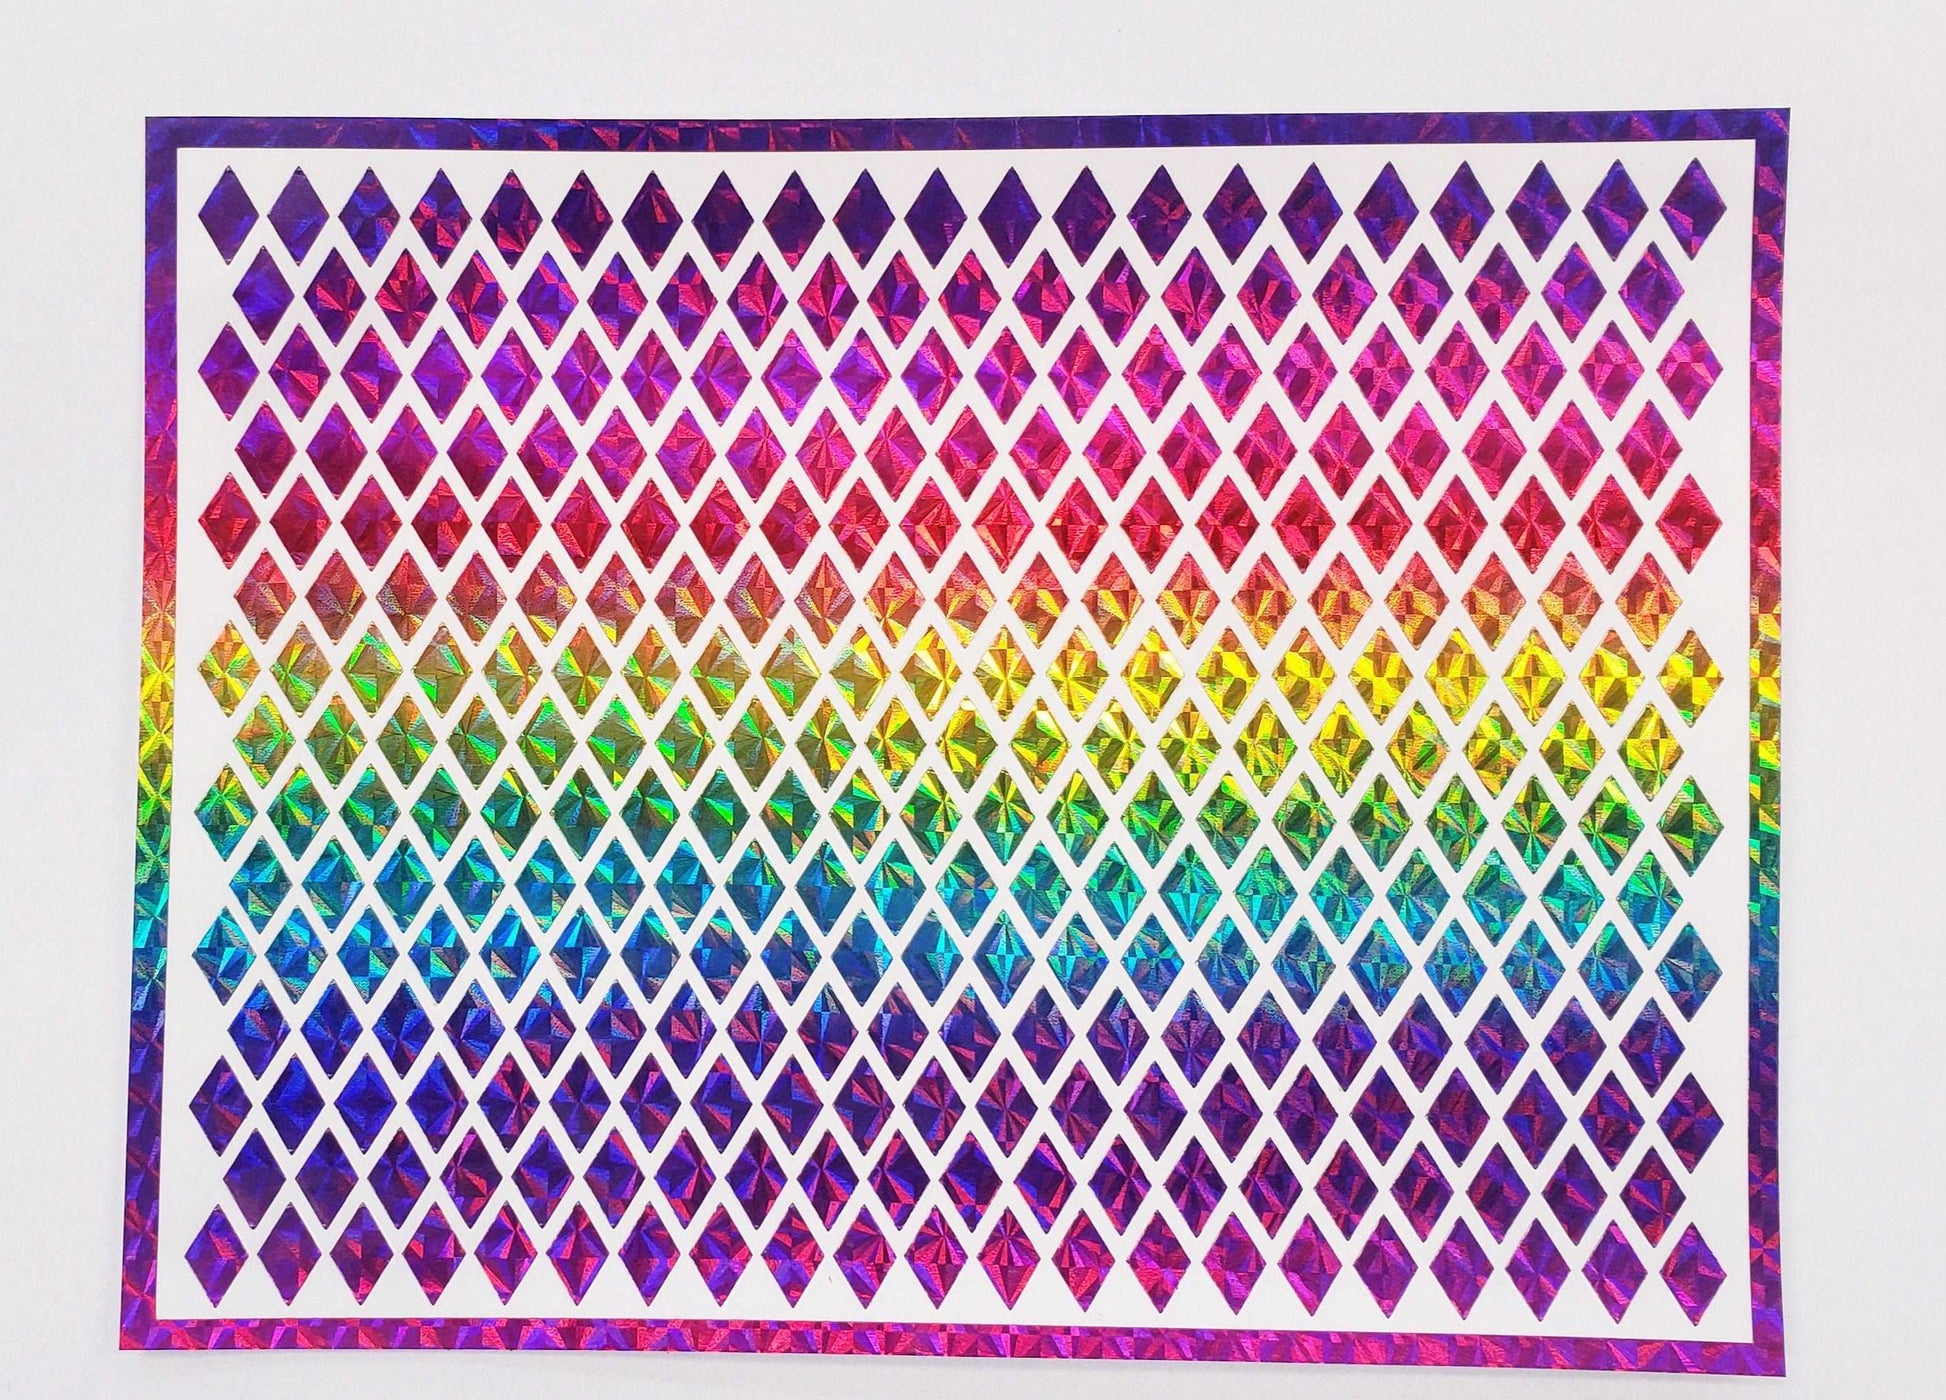 Extra Small Rainbow Diamond Shape Stickers, set of 300 peel and stick multi color geometric diamonds for journals, nails and notebooks